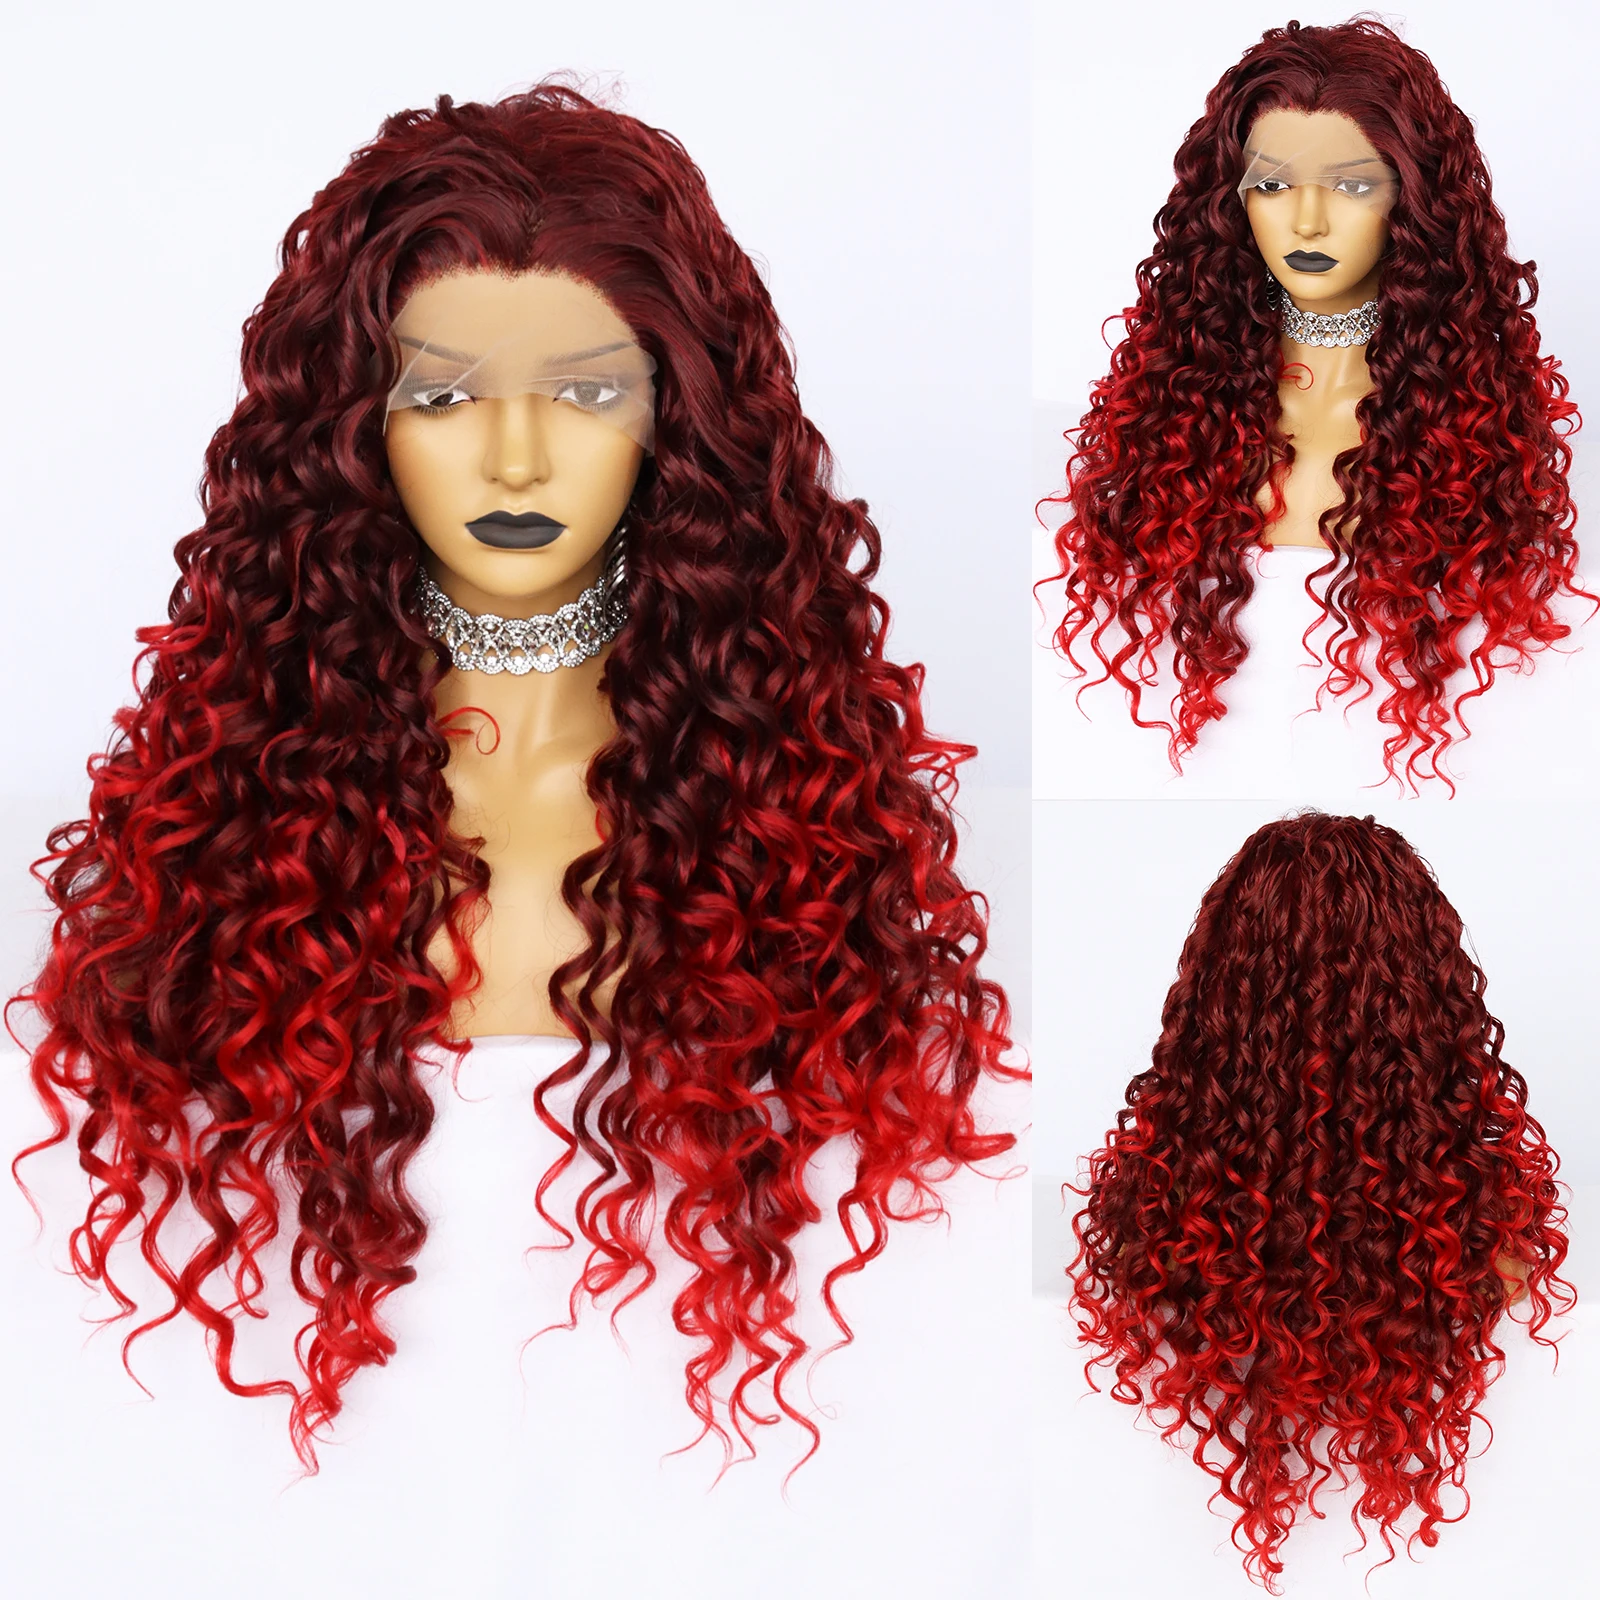 JONETING Long Curly Ombre Red 13*2.5 Heat Resistant Synthetic Lace Front Wigs for Women